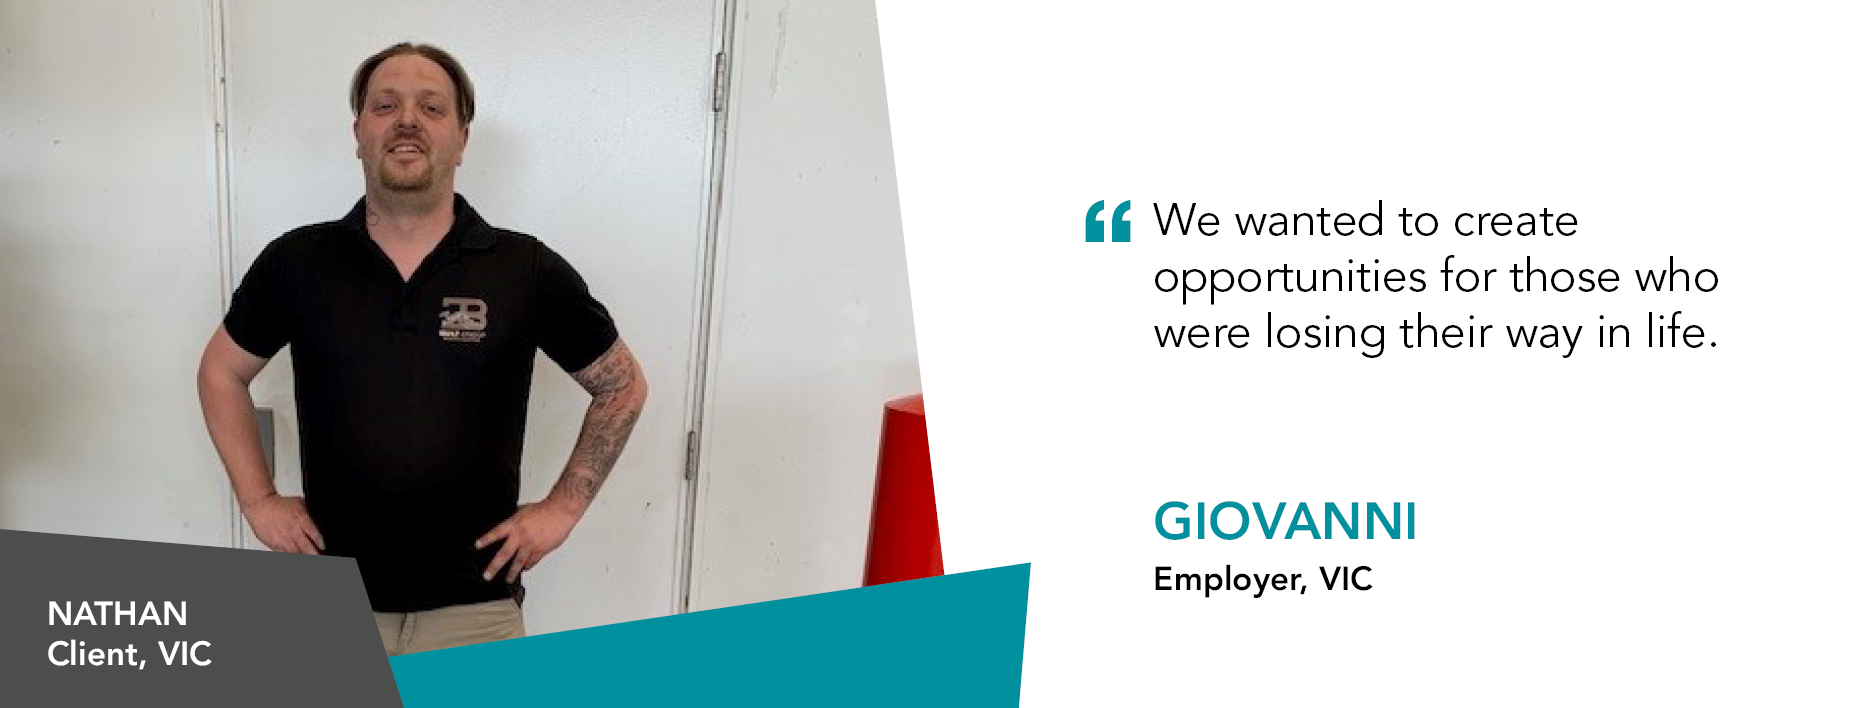 Quote reads " We wanted to create opportunities for those who were losing their way in life." said Giovanni, Employer in Victoria